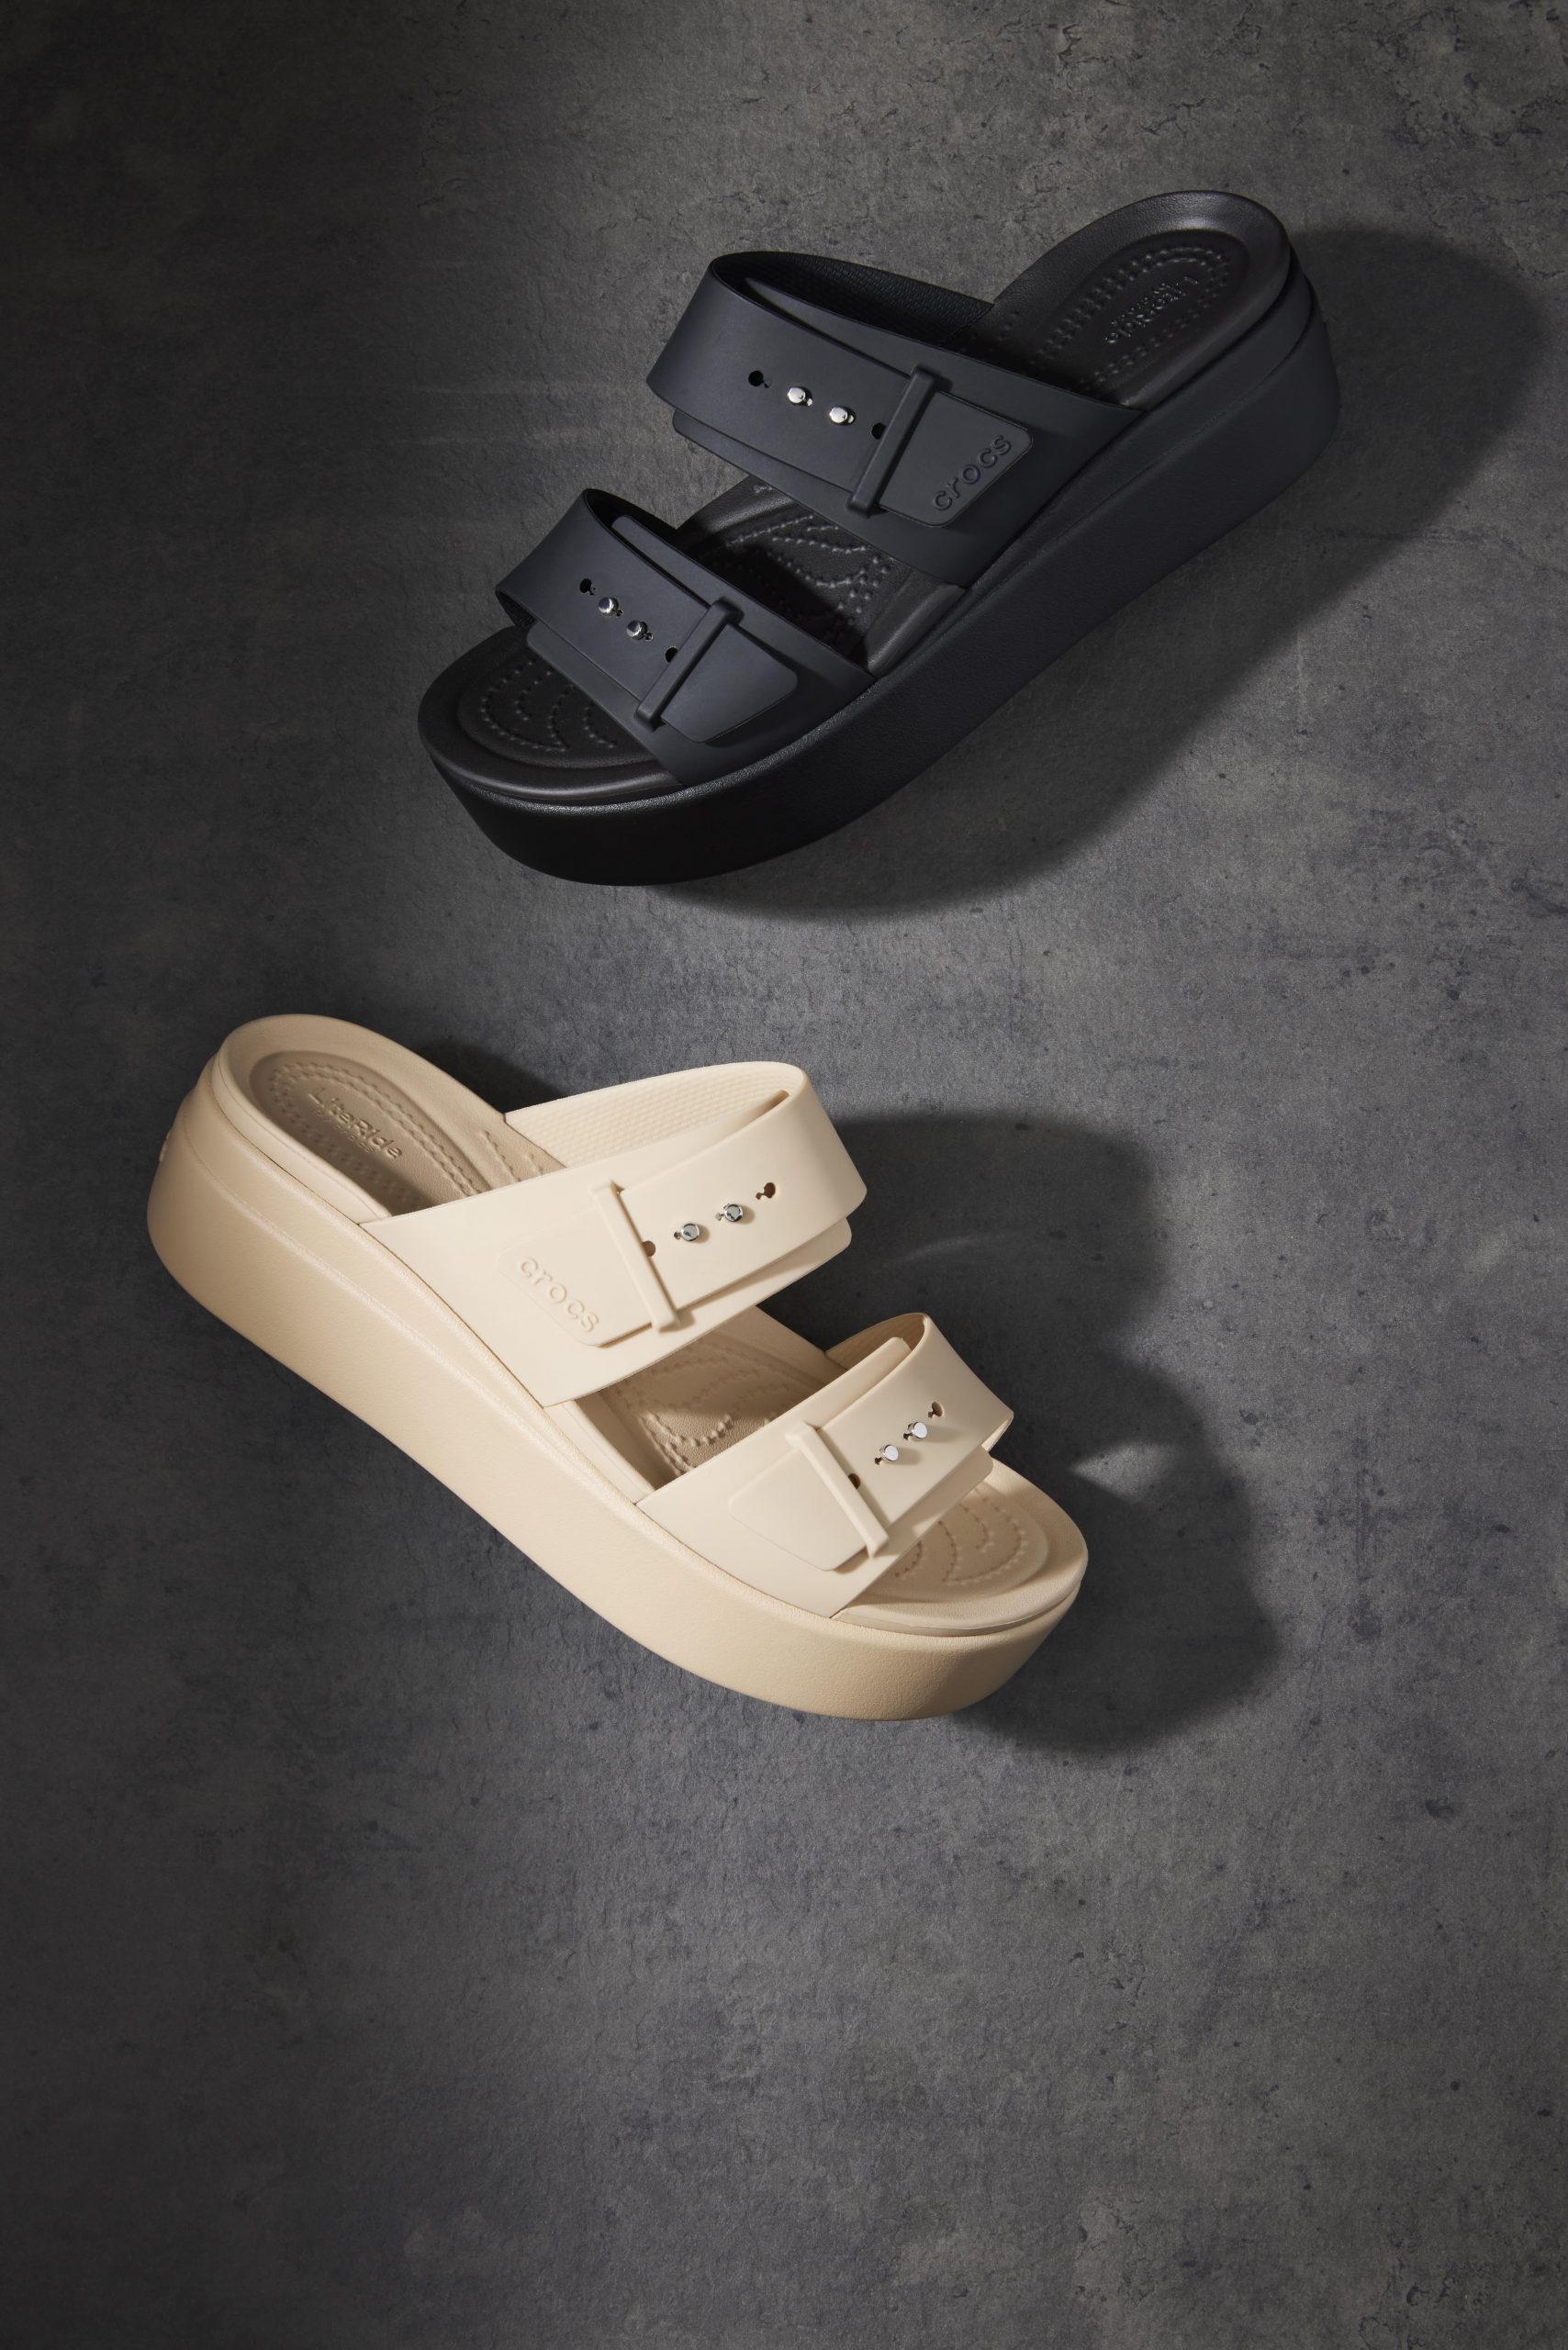 Elevate your summer wardrobe with Crocs Brooklyn Sandals